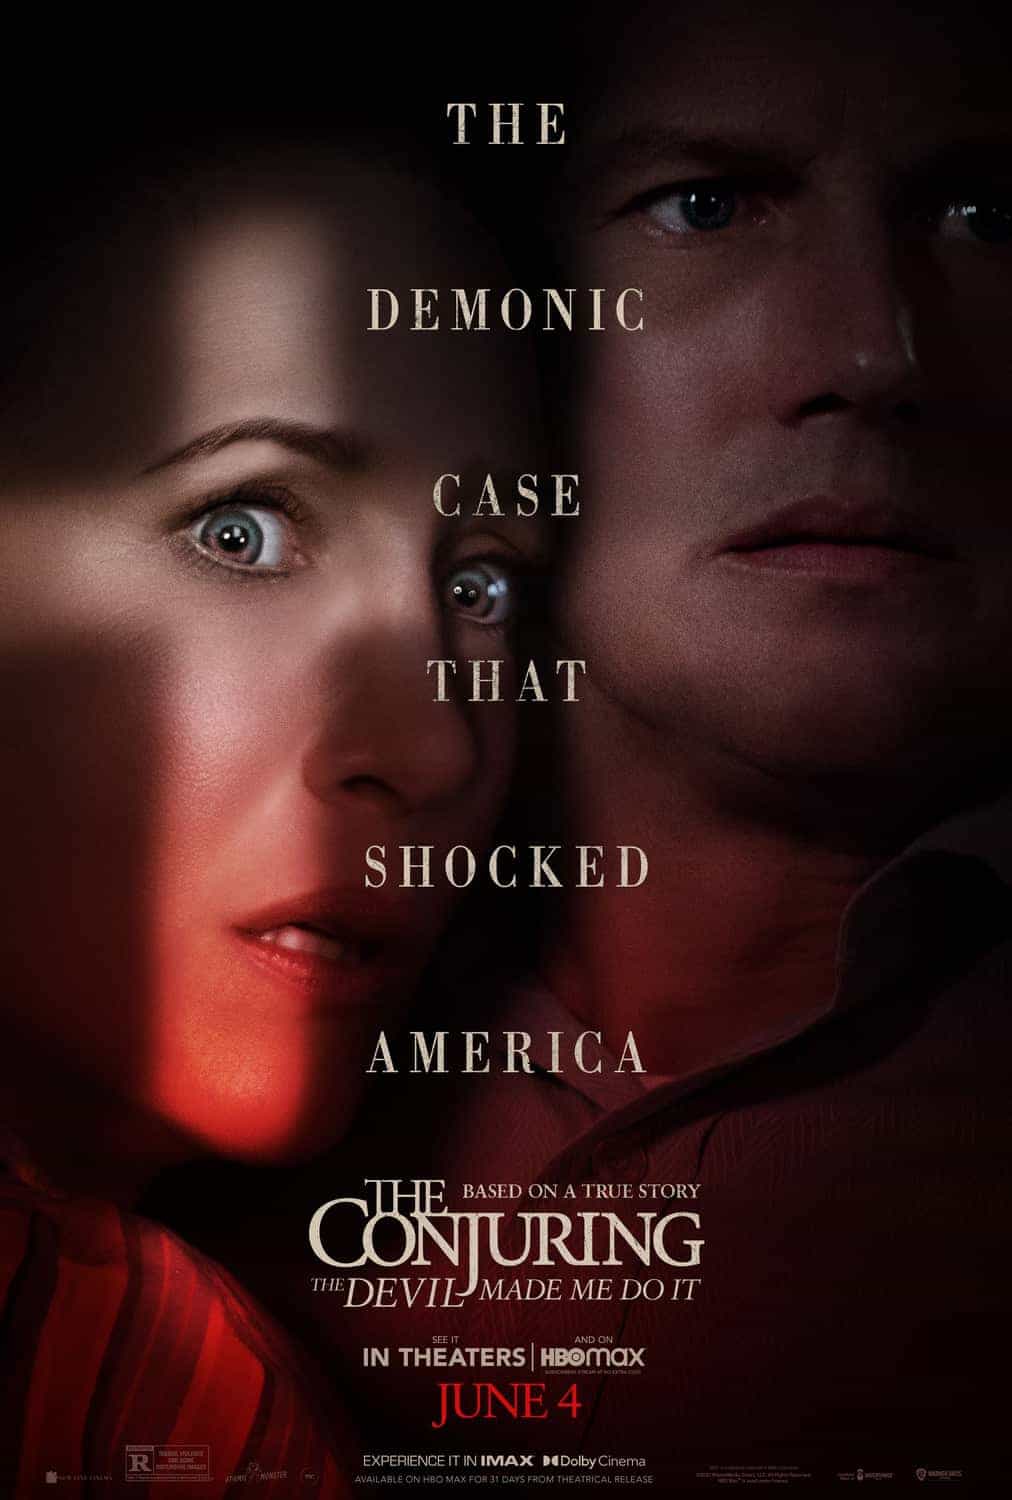 World Box Office Weekend Report 4th - 6th June 2021:  The Conjuring 3 moves to the top as its global market count increases